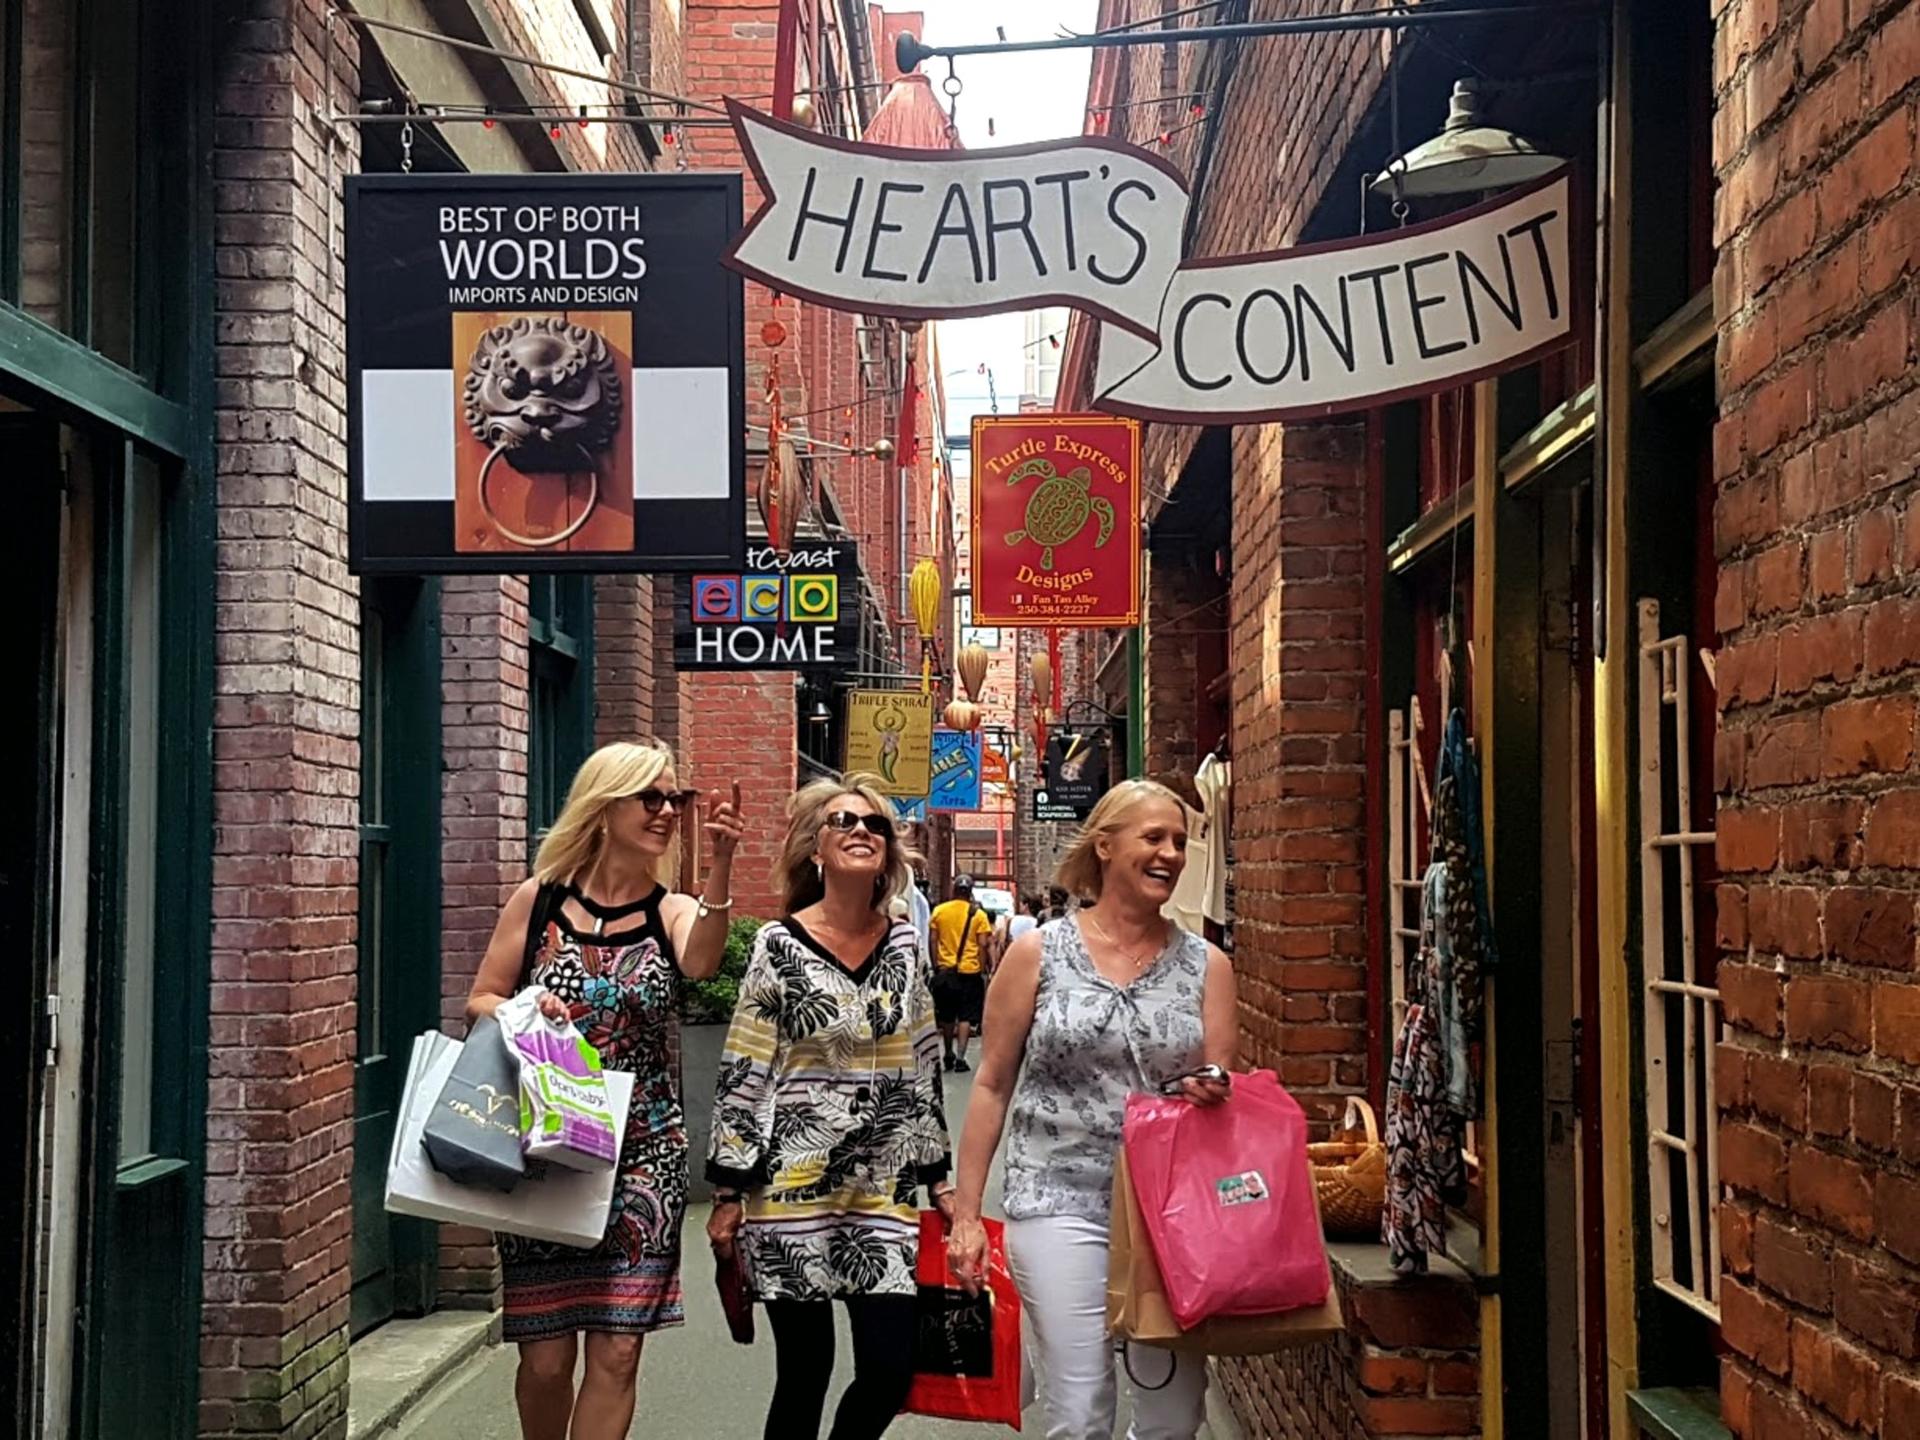 All tours are customized to your groups interests and always sprinkled with Victoria's most interesting places to see. These ladies went to town and loved the quirky shops in Fan Tan Alley